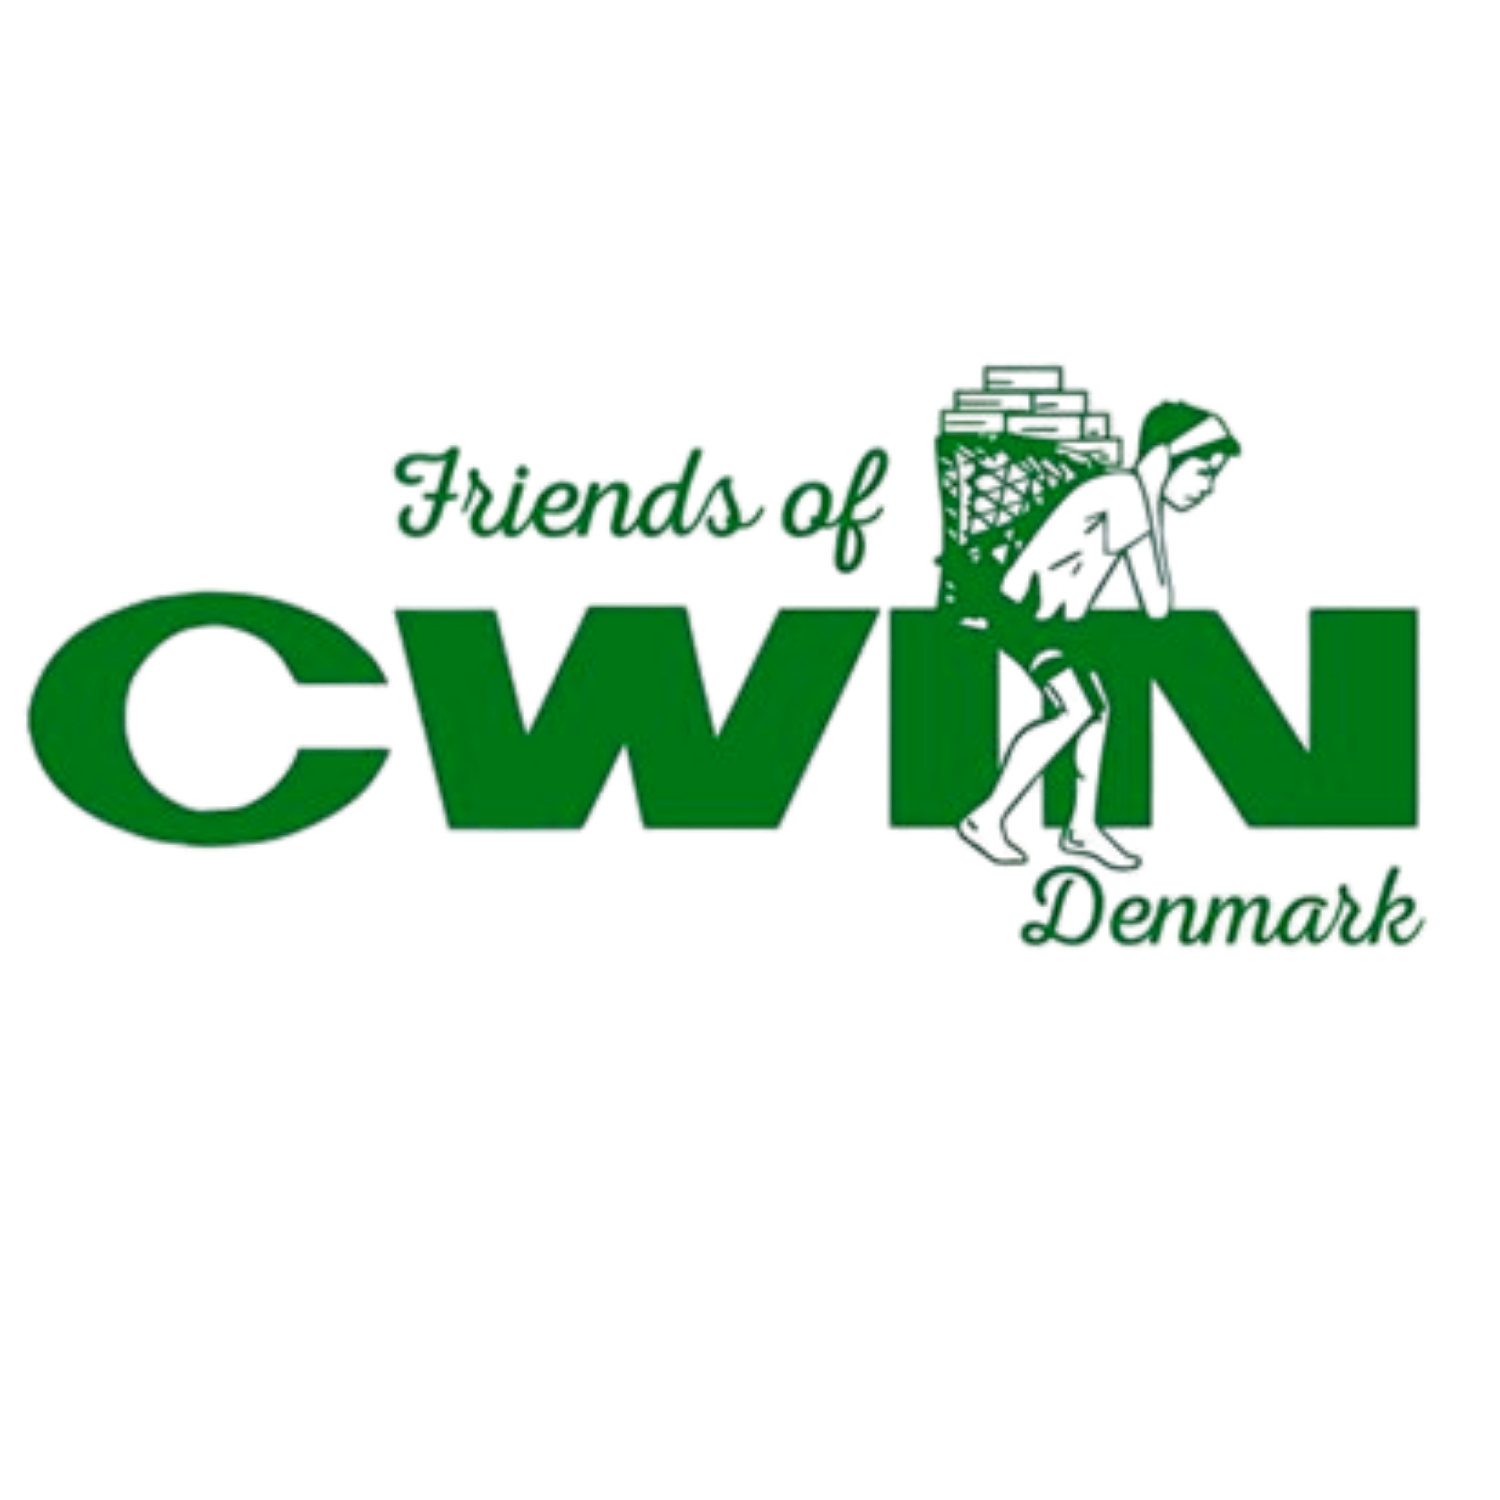 Friends of CWIN